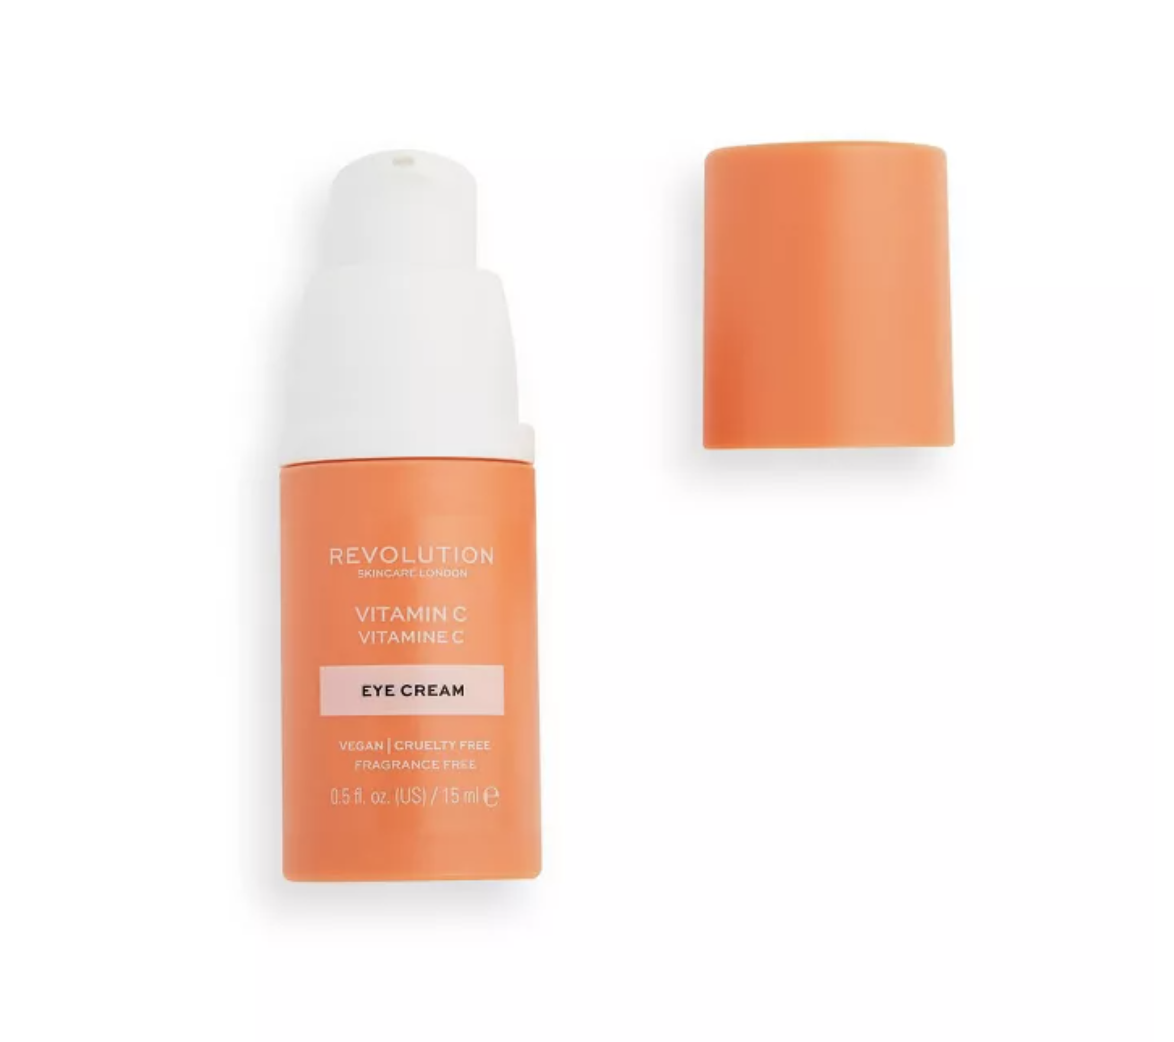 Orange and white bottle of Makeup Revolution eye cream with the cap off